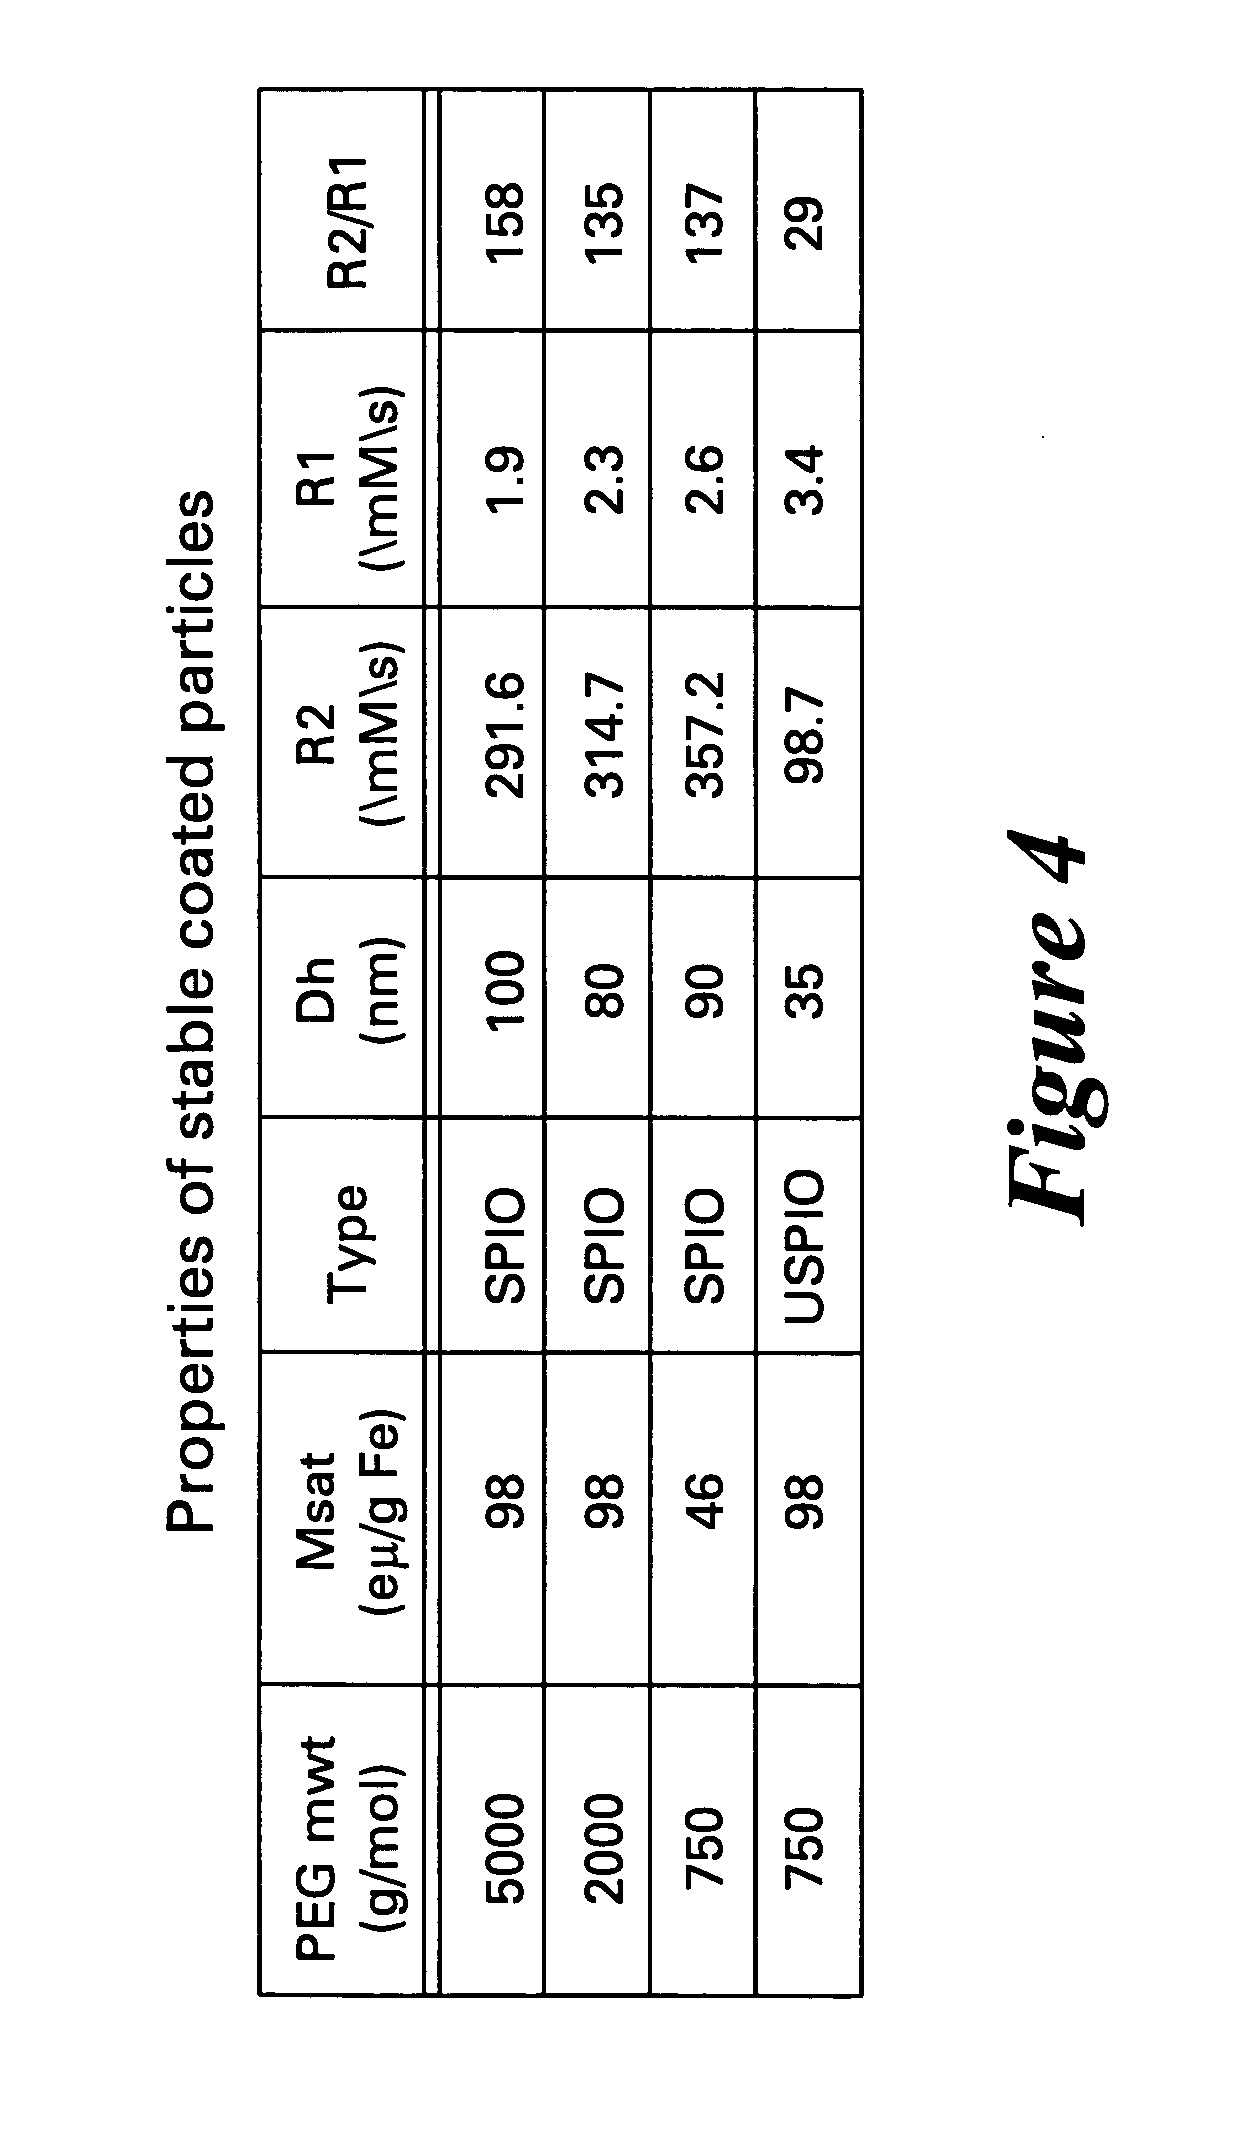 Contrast agents for magnetic resonance imaging